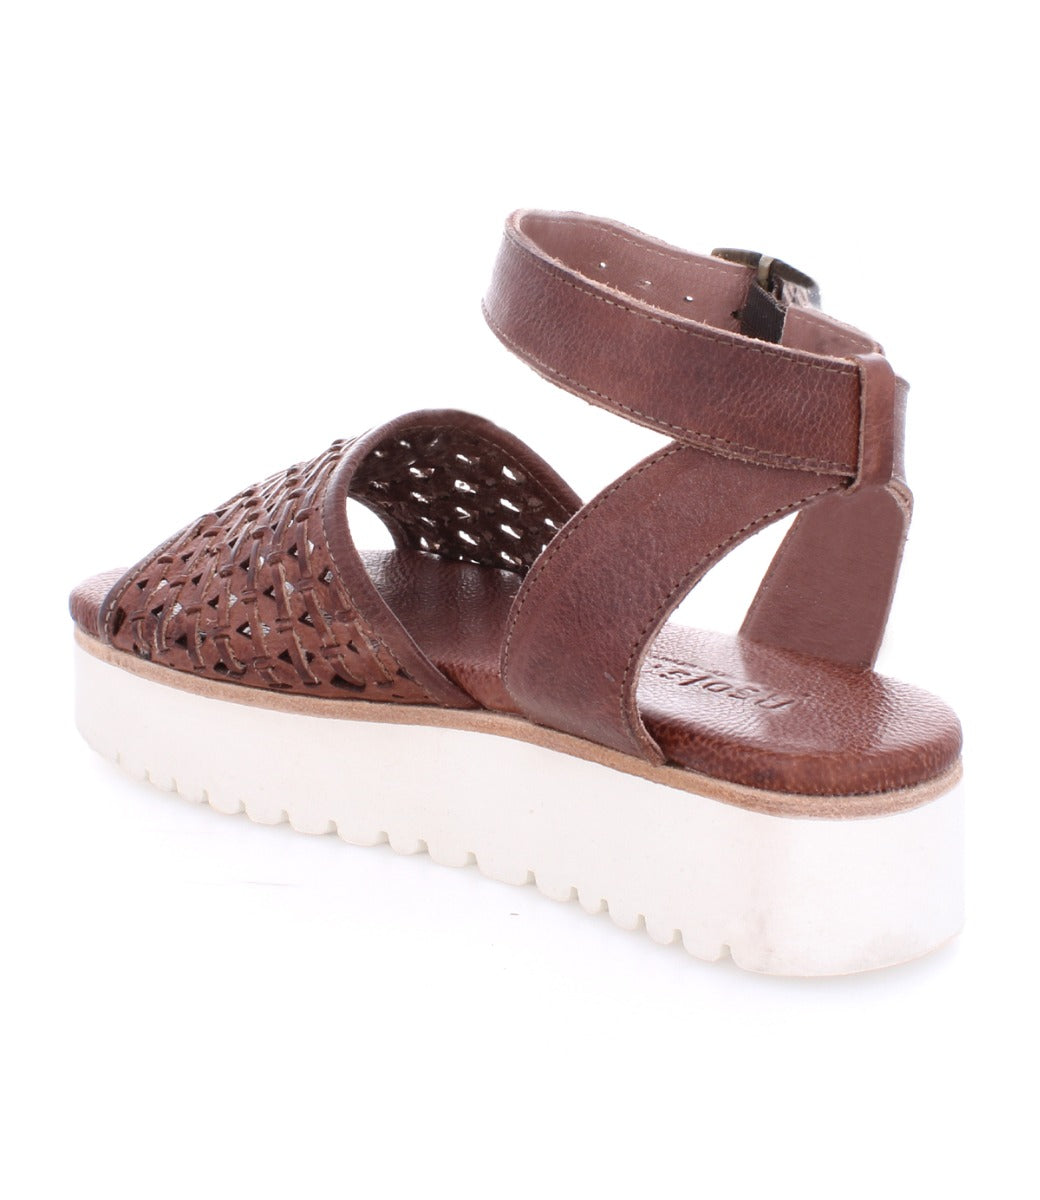 A women's brown Brisa sandal with woven straps and a white sole by Bed Stu.